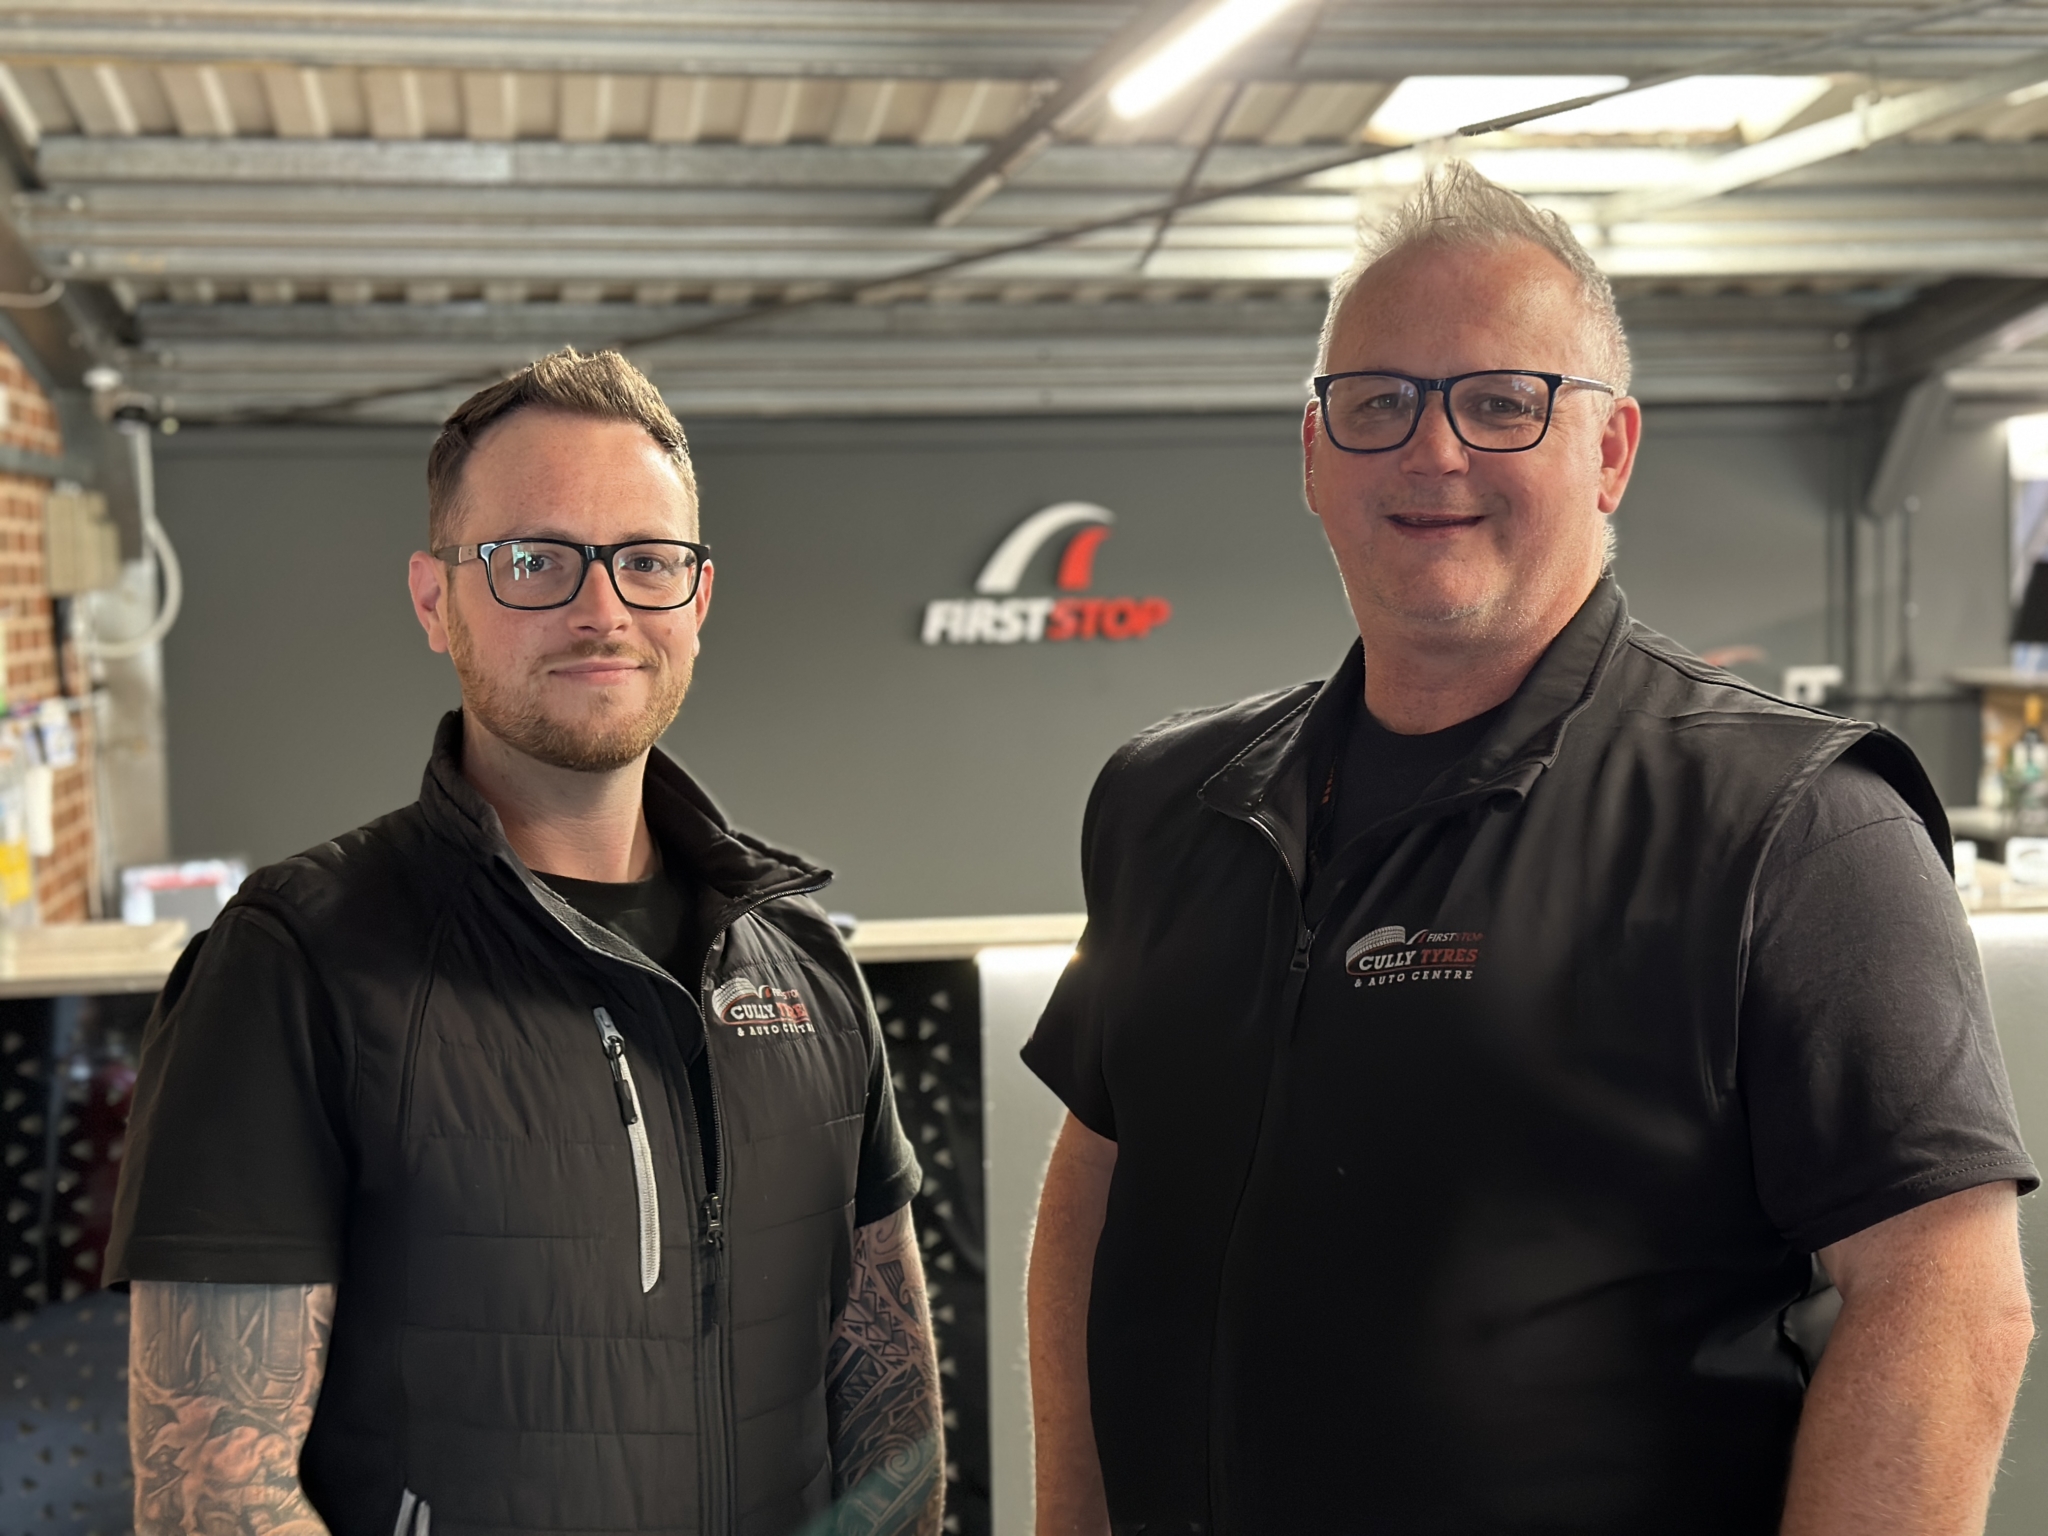 Mid-Devon garage records most profitable period with new ownership, First Stop membership